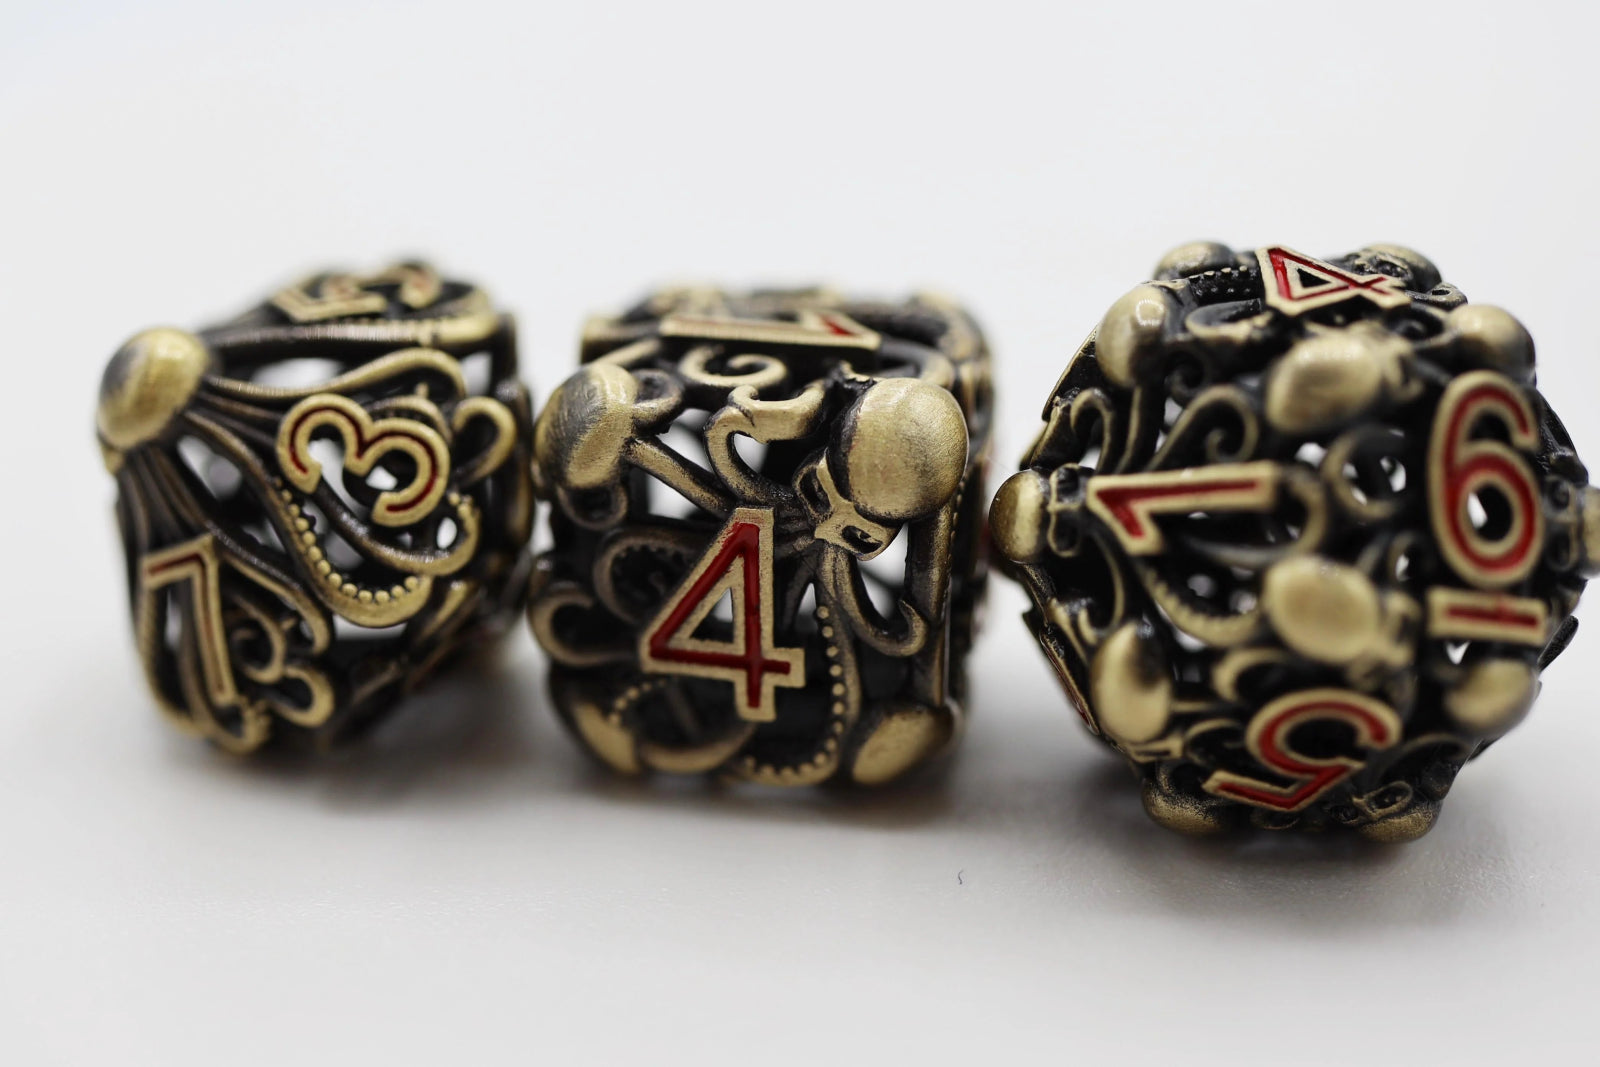 Mind Eater: Bronze - Hollow Metal RPG Dice Set - The Fourth Place